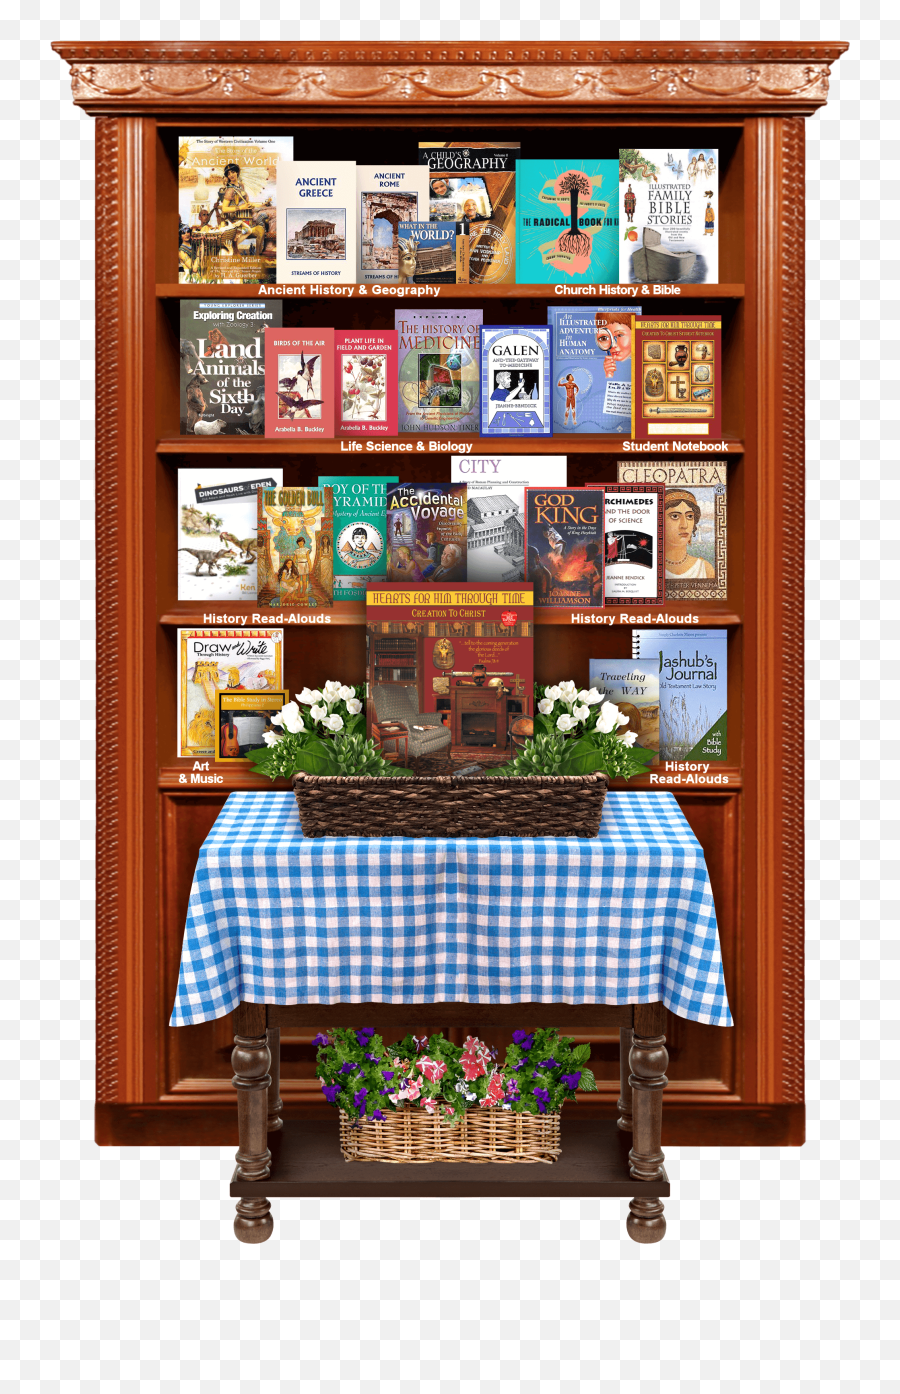 Creation To Homeschool - Furniture Style Emoji,Captivating Pictures Of People And Animals, With Feelings And Emotions